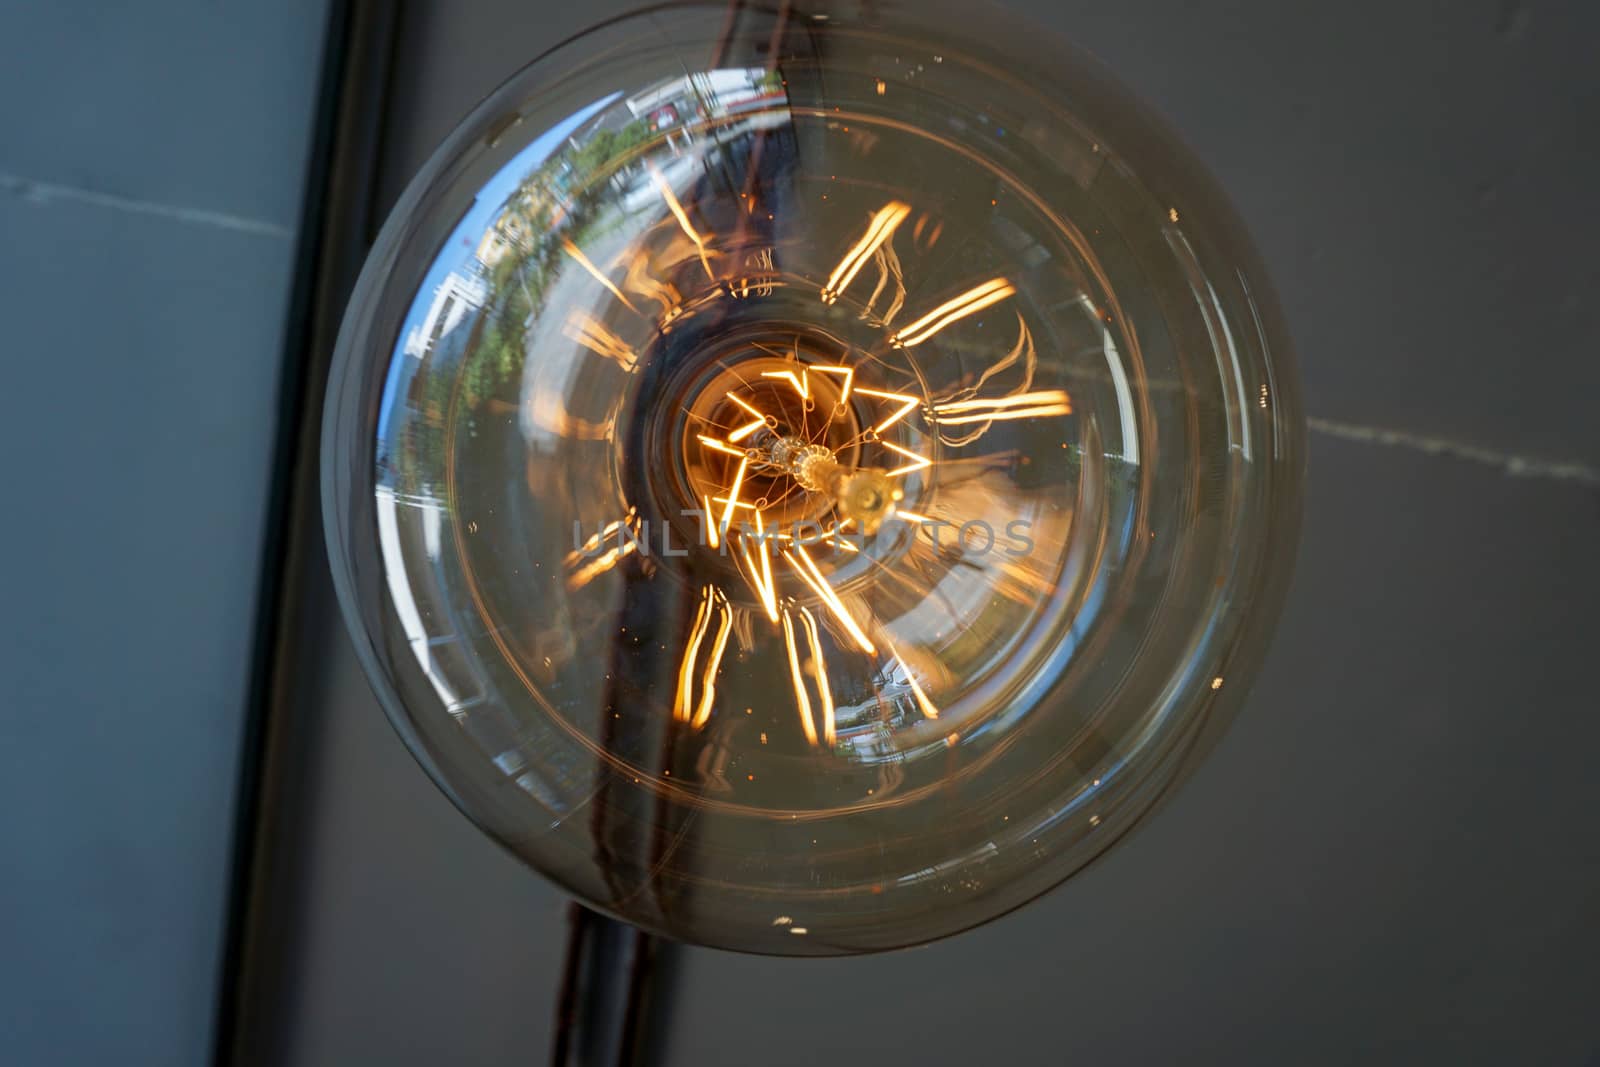 Amazing spiral electric current inside a retro crystal clear lig by sonandonures